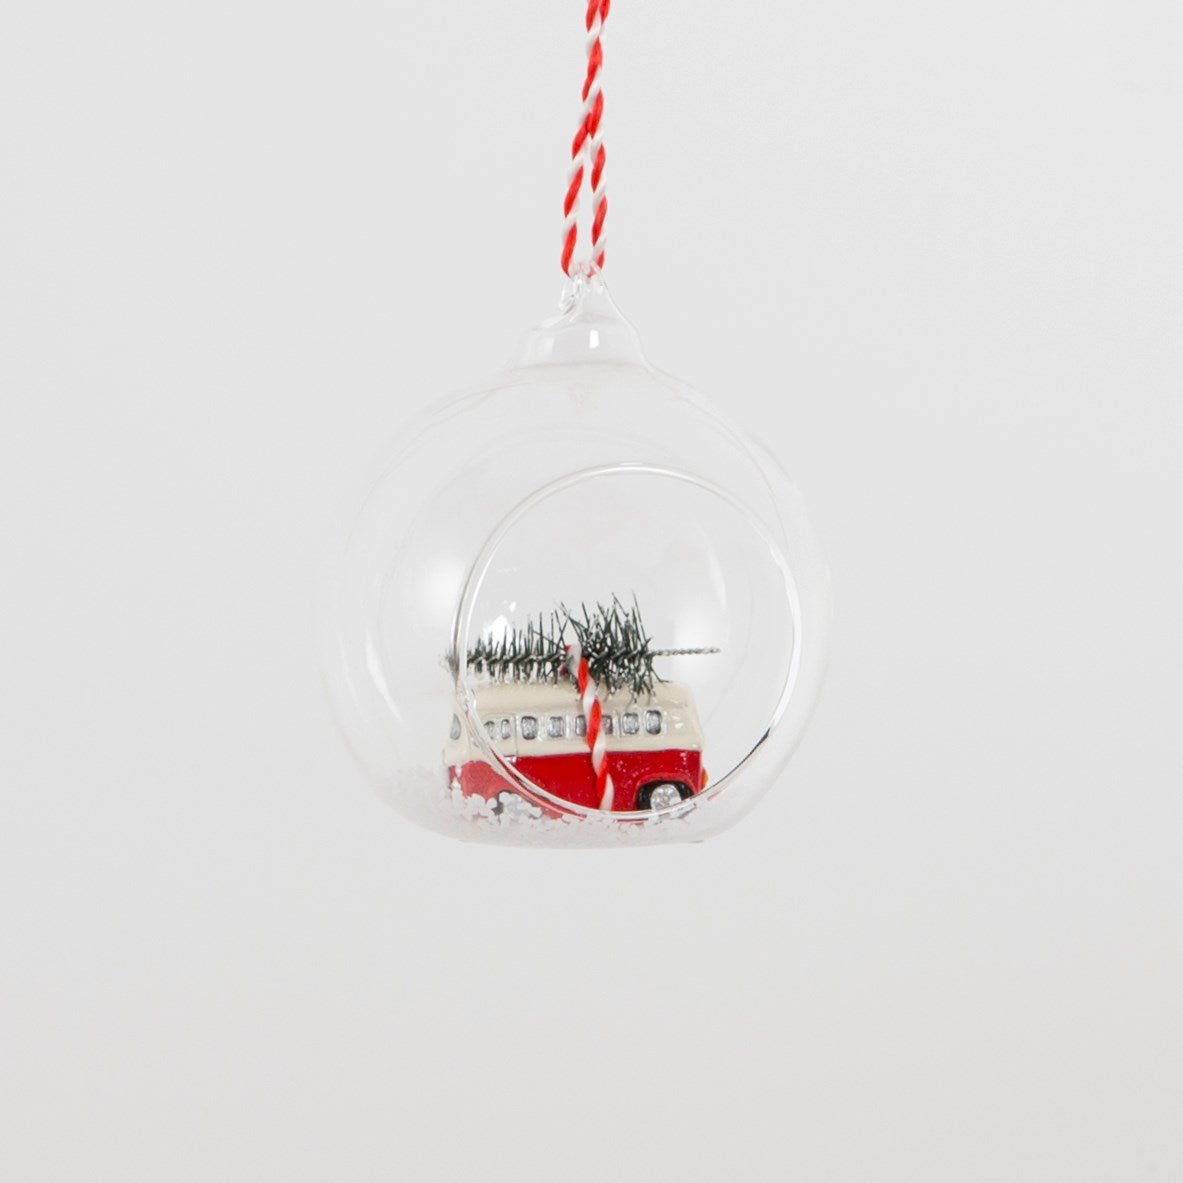 Open glass bauble with a red and white campervan carrying a Christmas tree in the snow.